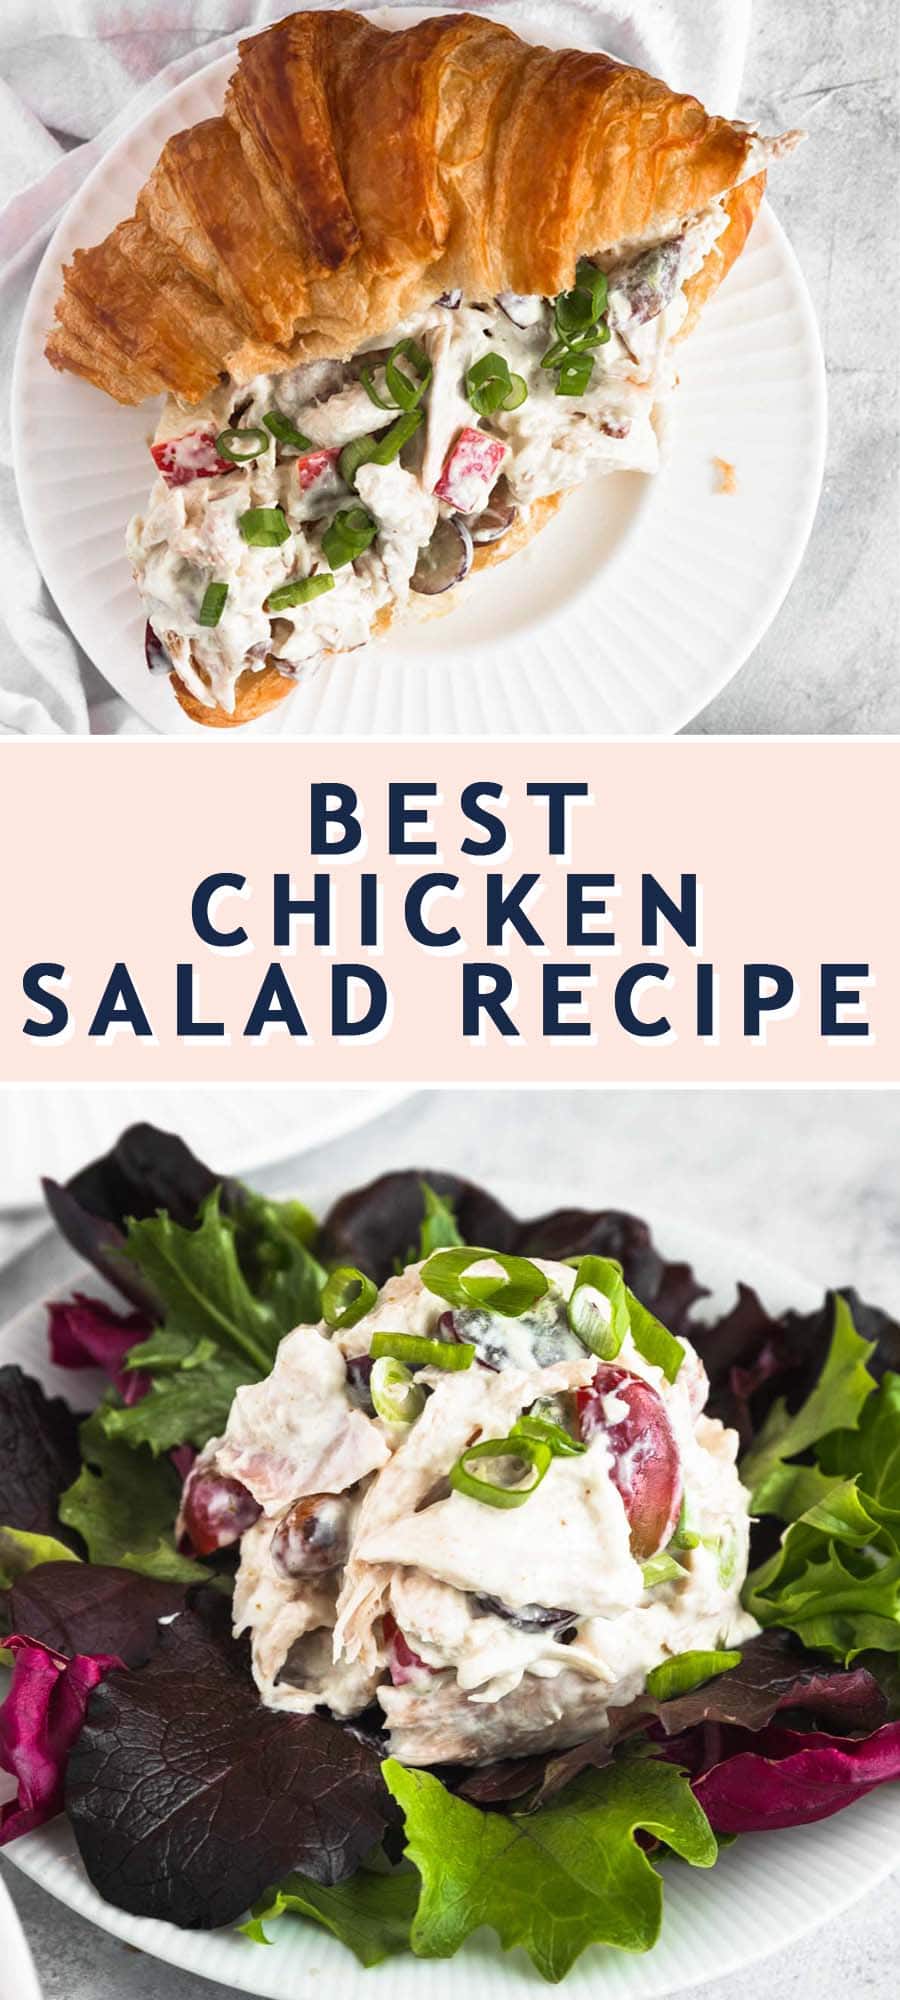 photo of the recipe card on how to make the best chicken salad by top Houston lifestyle blogger Ashley Rose of Sugar & Cloth